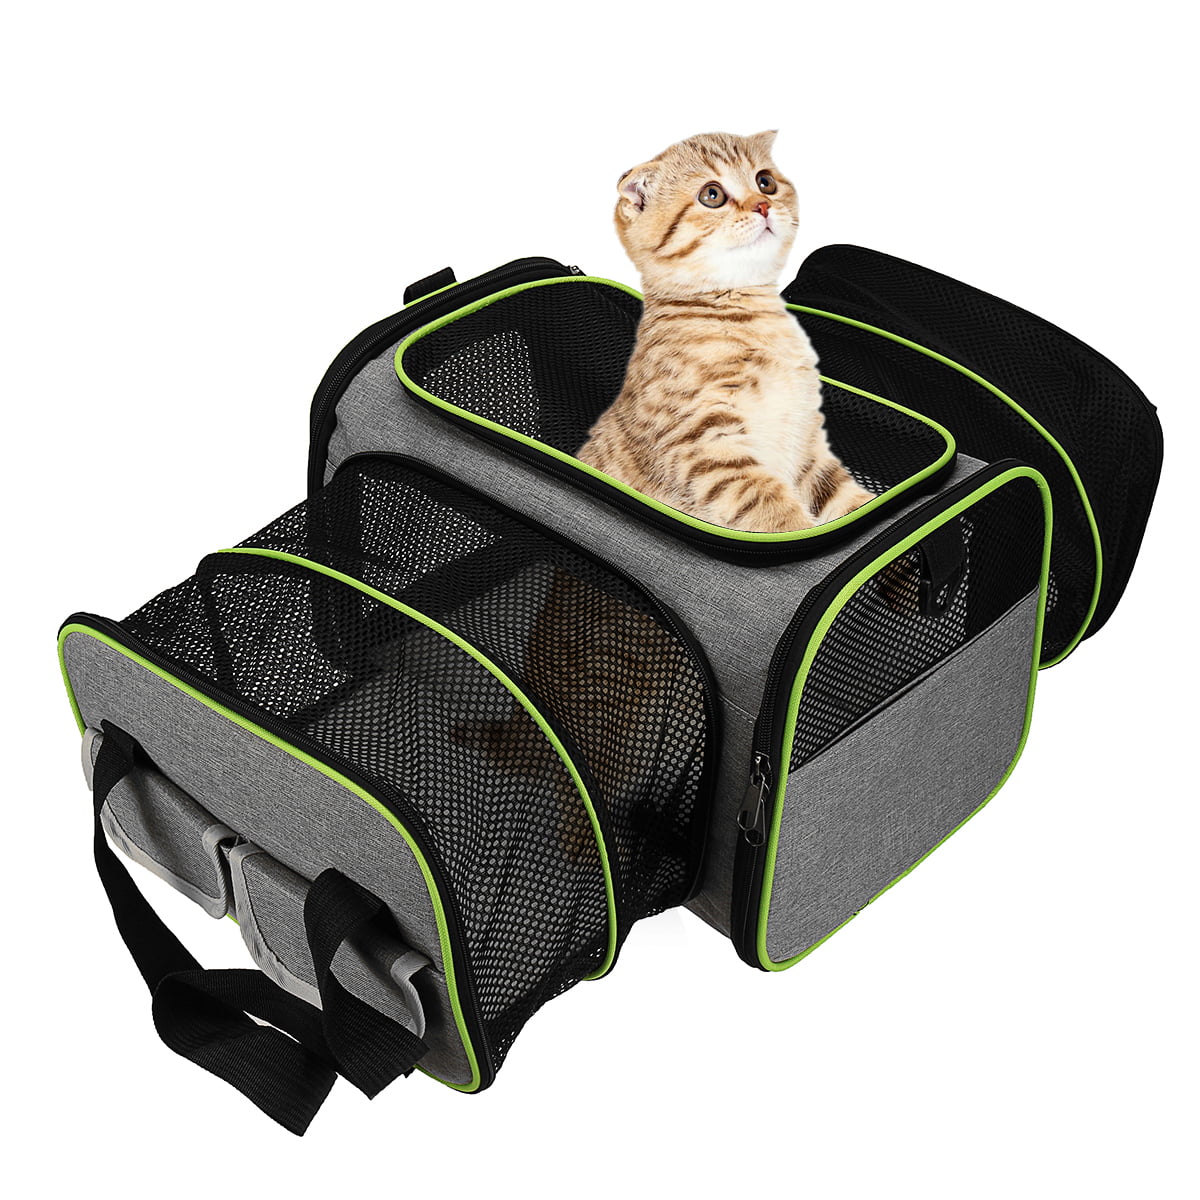 Camping Airline Approved Backpack Bag for Travel WDM Pet Carrier Backpack for Dogs and Cats Hiking Designed for Cat/Puppies/Guinea Pig/Bunny Walking & Outdoor Use